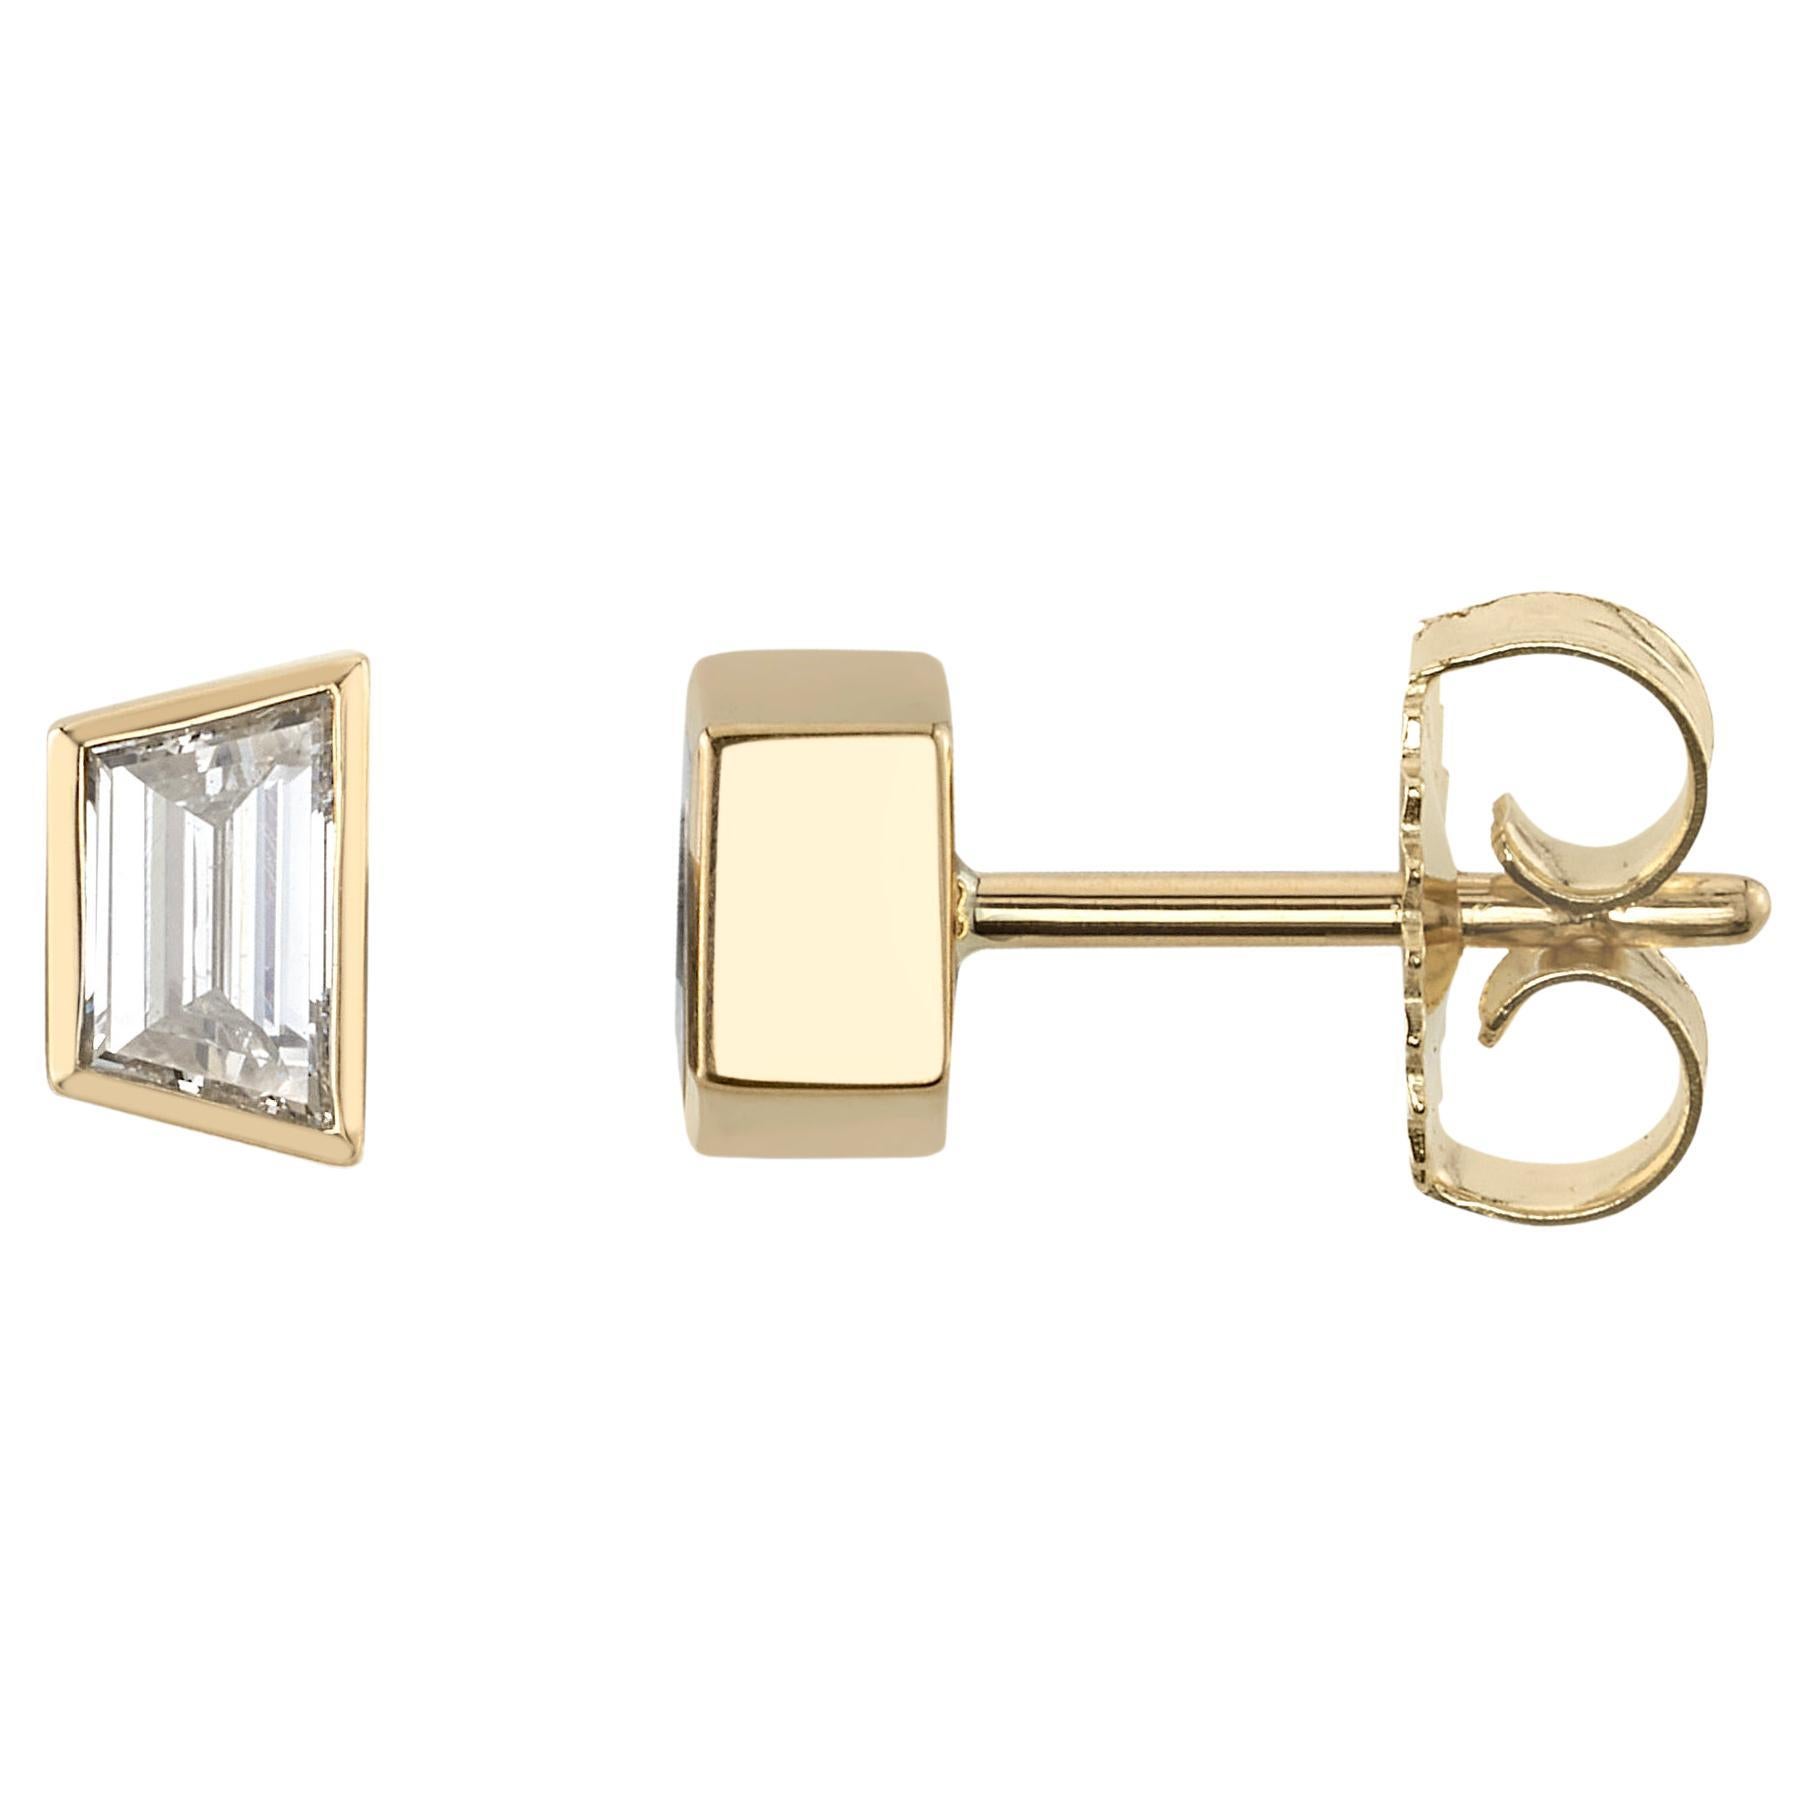 0.98ctw F/VS1 trapezoid cut diamonds bezel set in handcrafted 18K yellow gold stud earrings.

Our jewelry is made locally in Los Angeles and most pieces are made to order. For these made-to-order items, please allow 8-12 weeks for delivery. In-stock